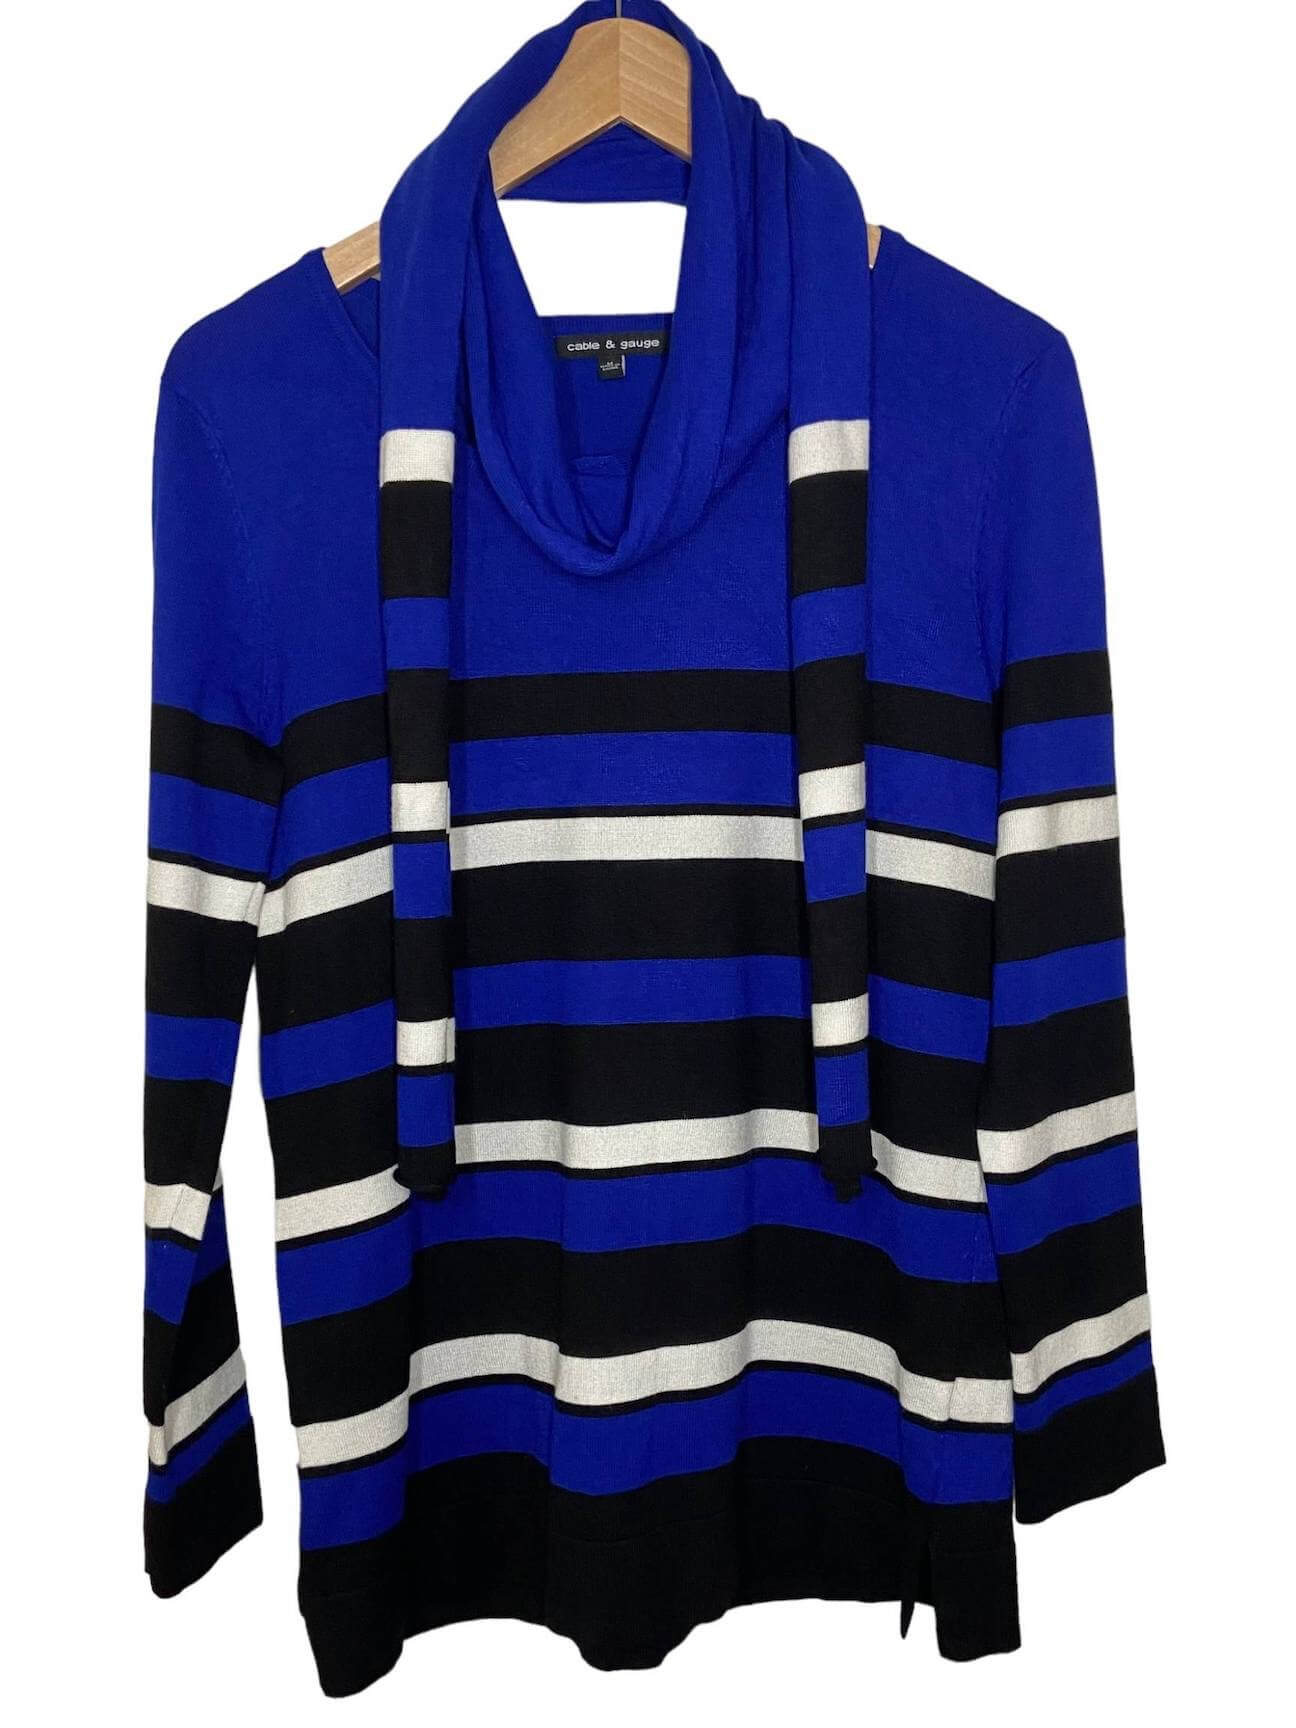 Bright Winter CABLE & GAUGE blue white black stripe sweater scarf